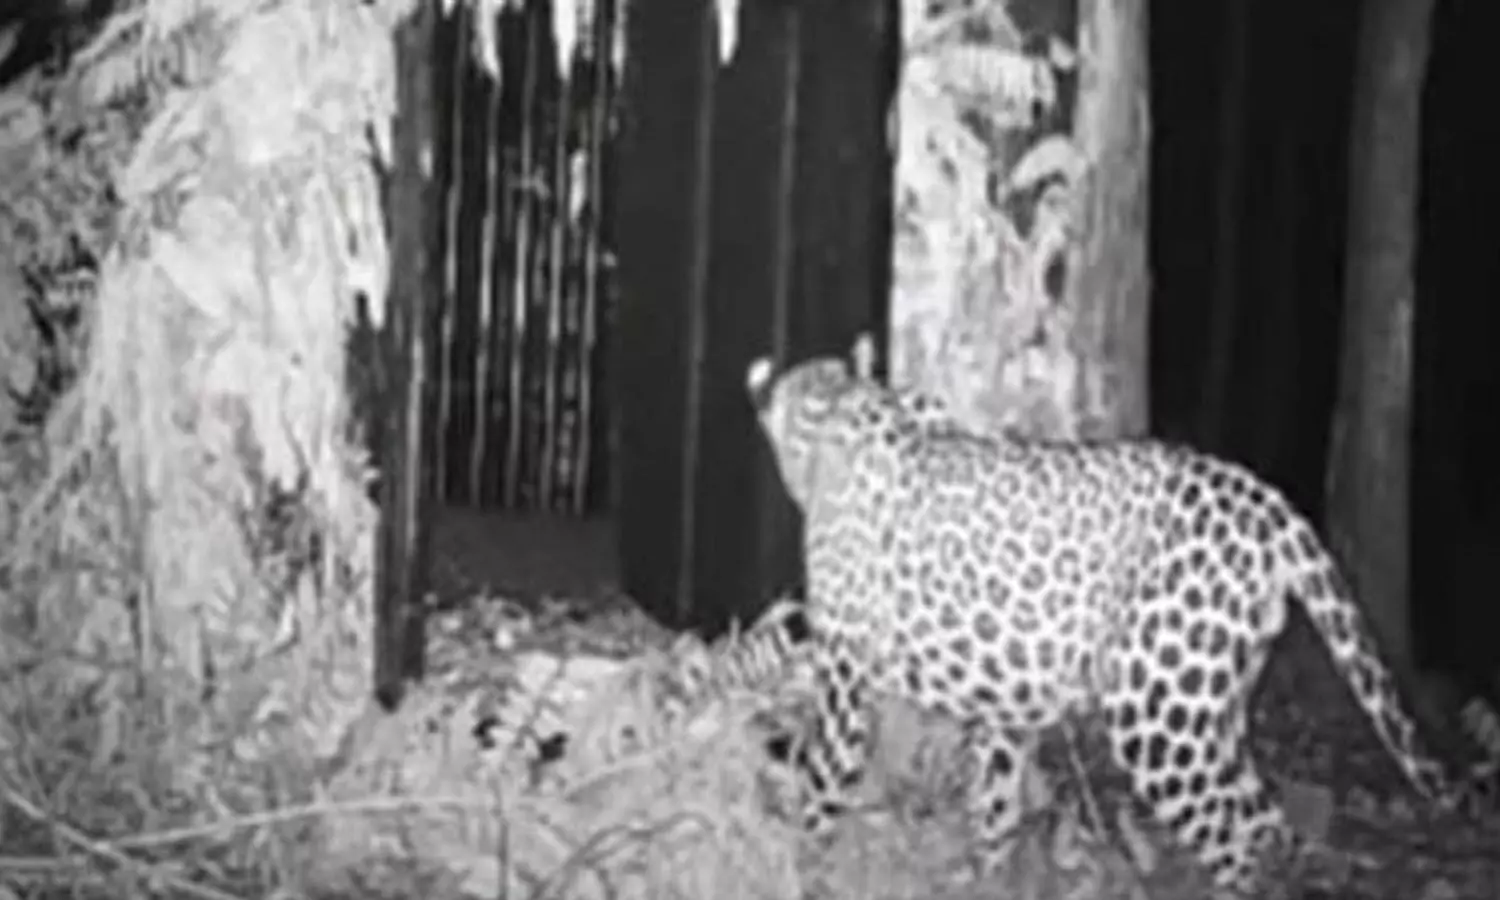 No respite for devotees thronging Tirumala, trap cameras capture one more leopards movement